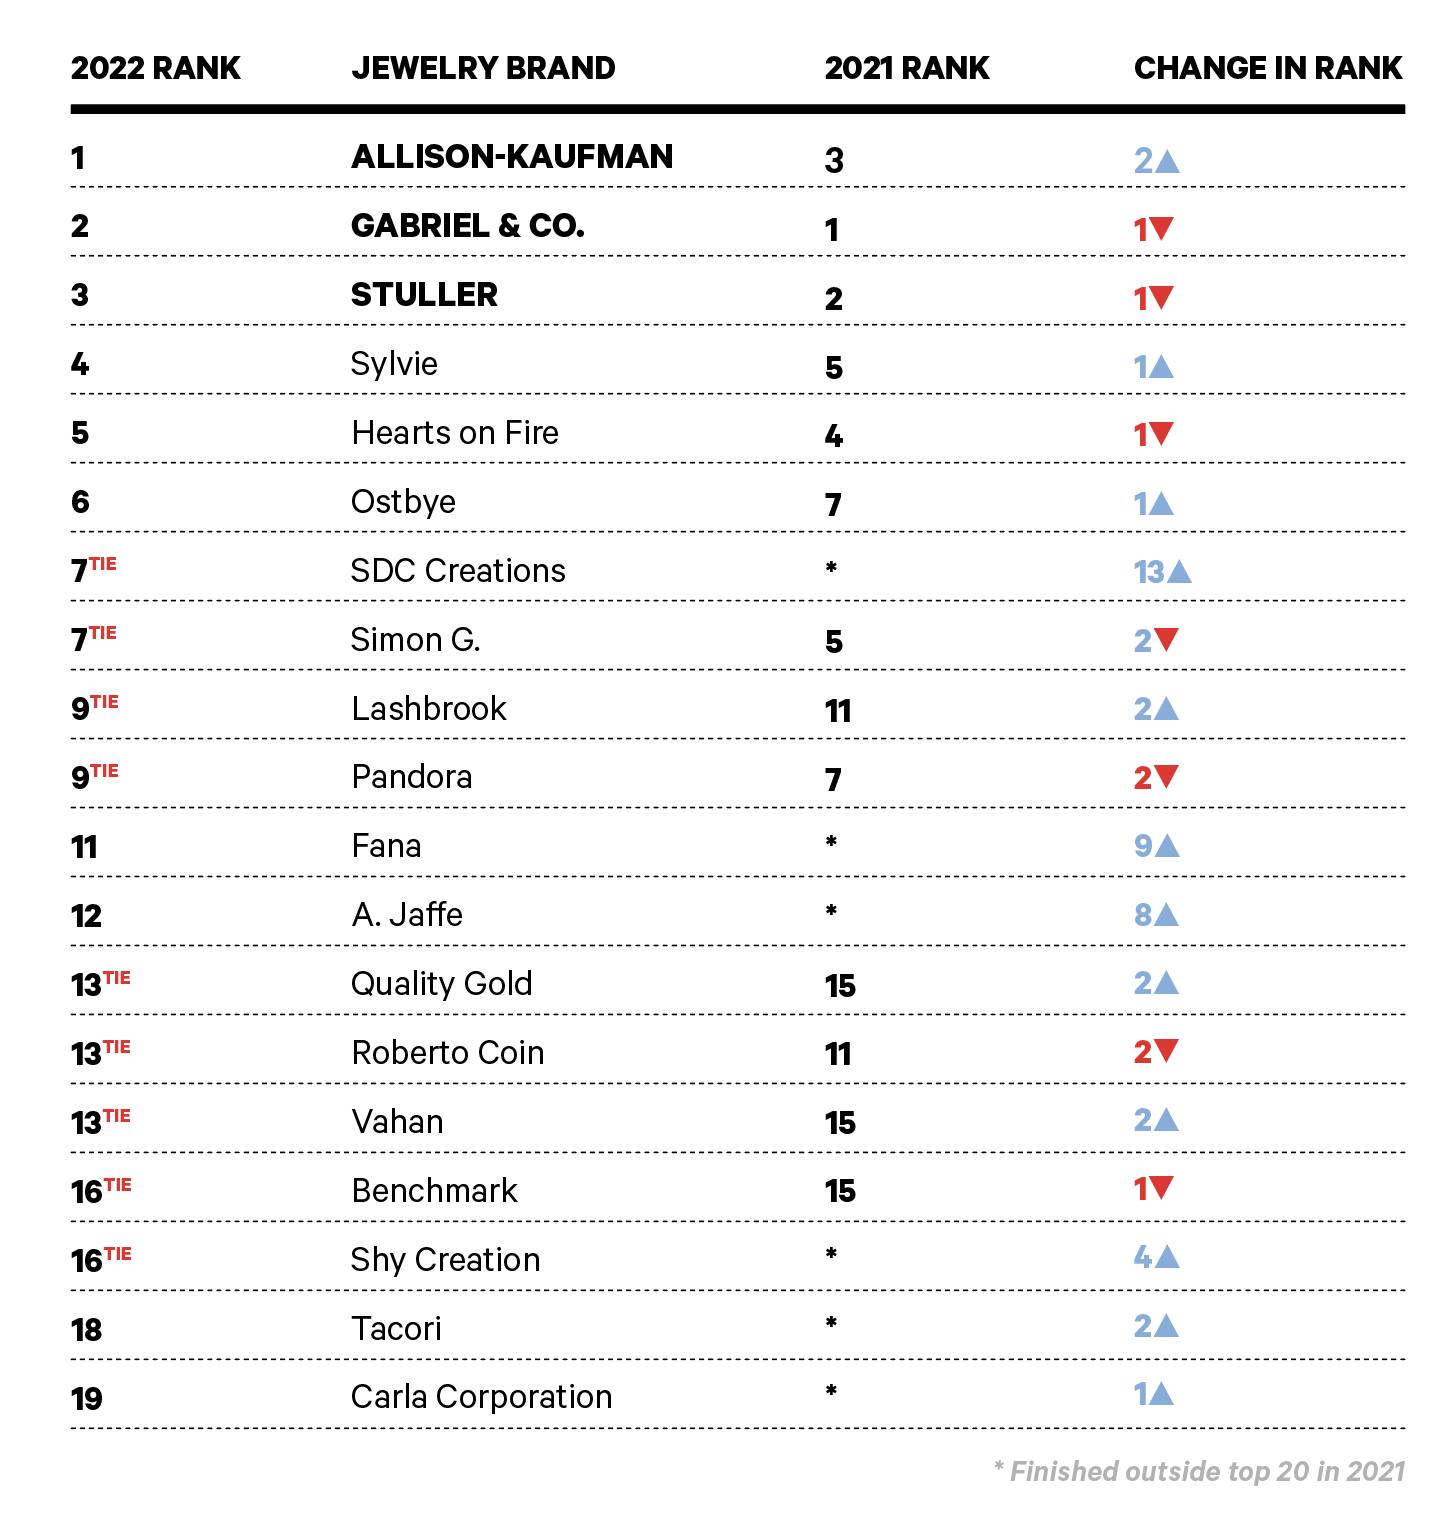 These Are the Top Jewelry Brands of 2022, According to The Big Survey